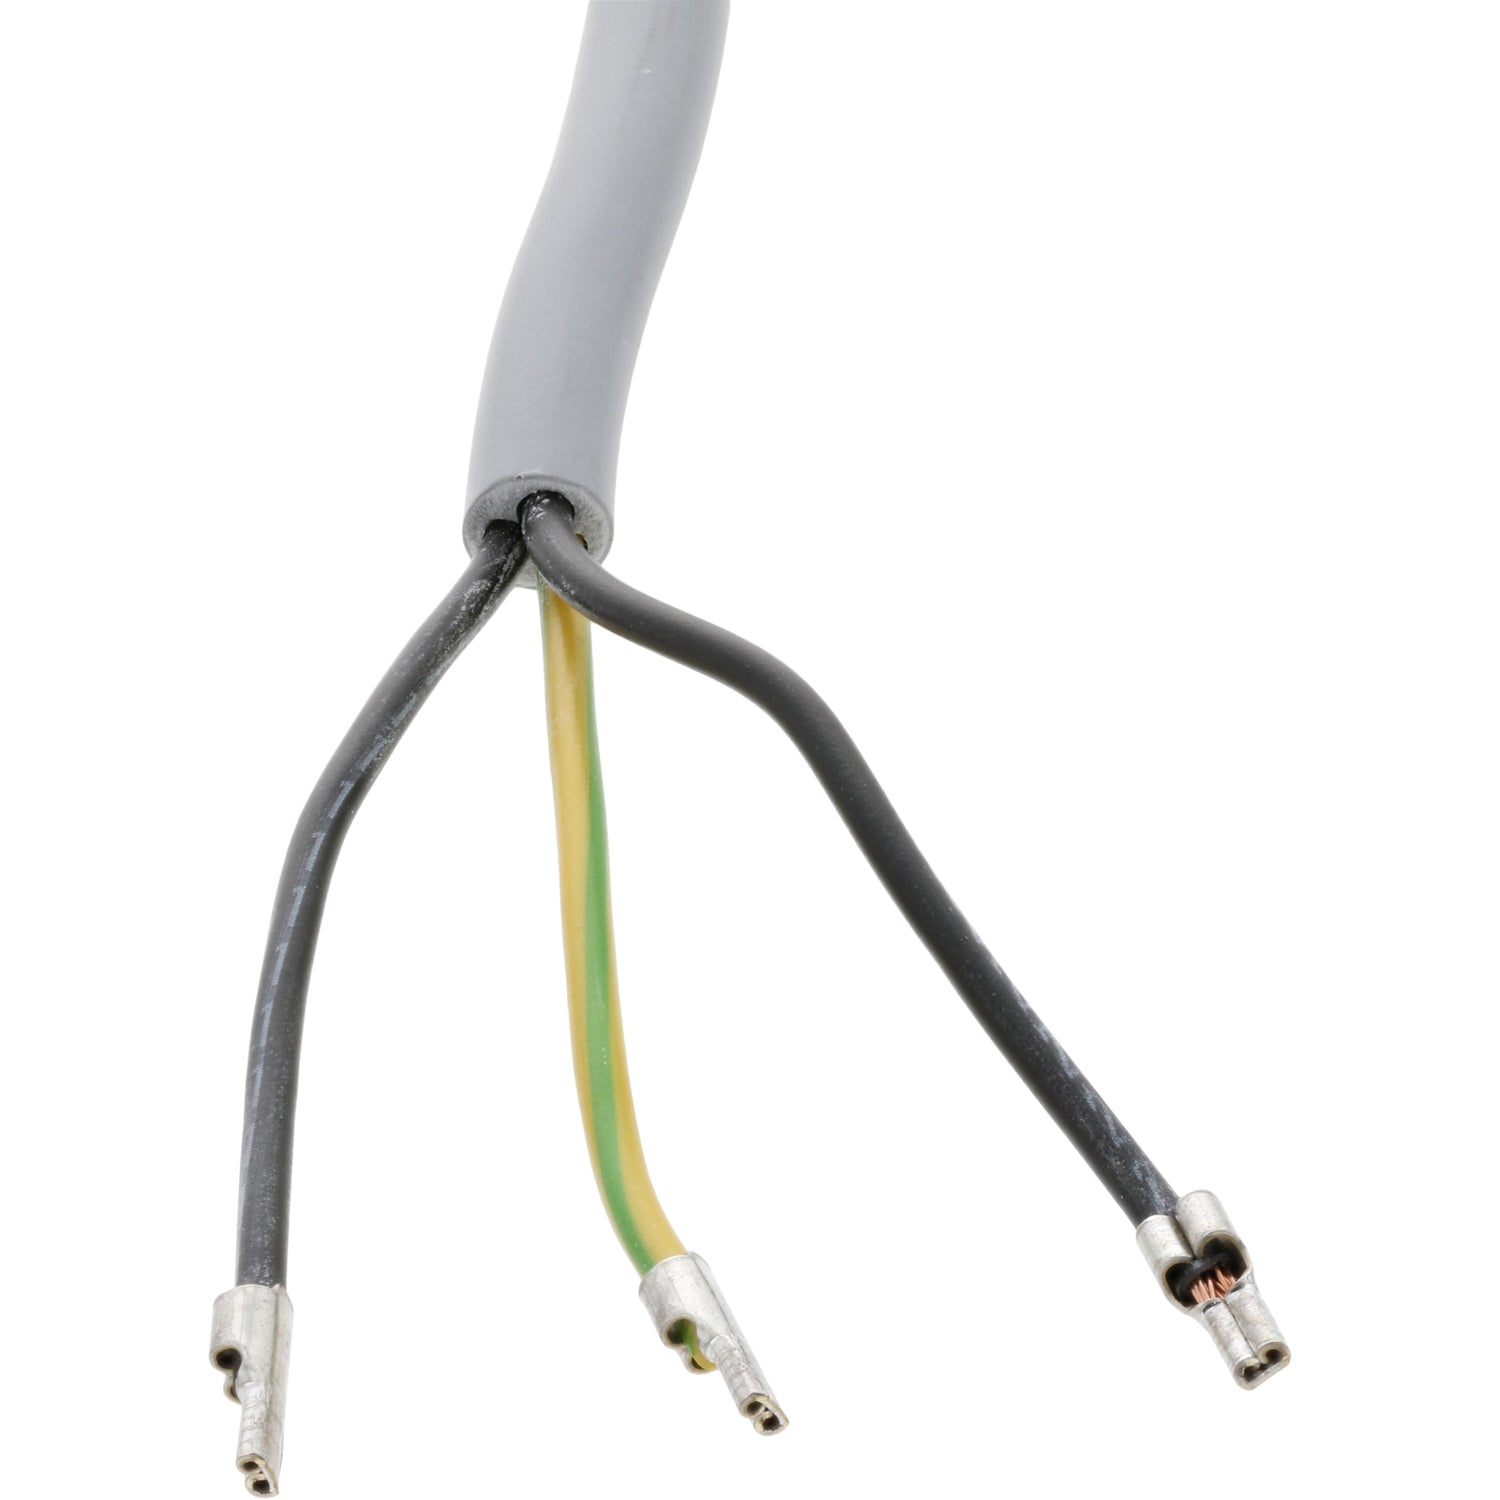 grey cable end with three exposed wires. There are two black wires and one wire that is yellow and green. The wires have ferules on them. Shown on white background.  